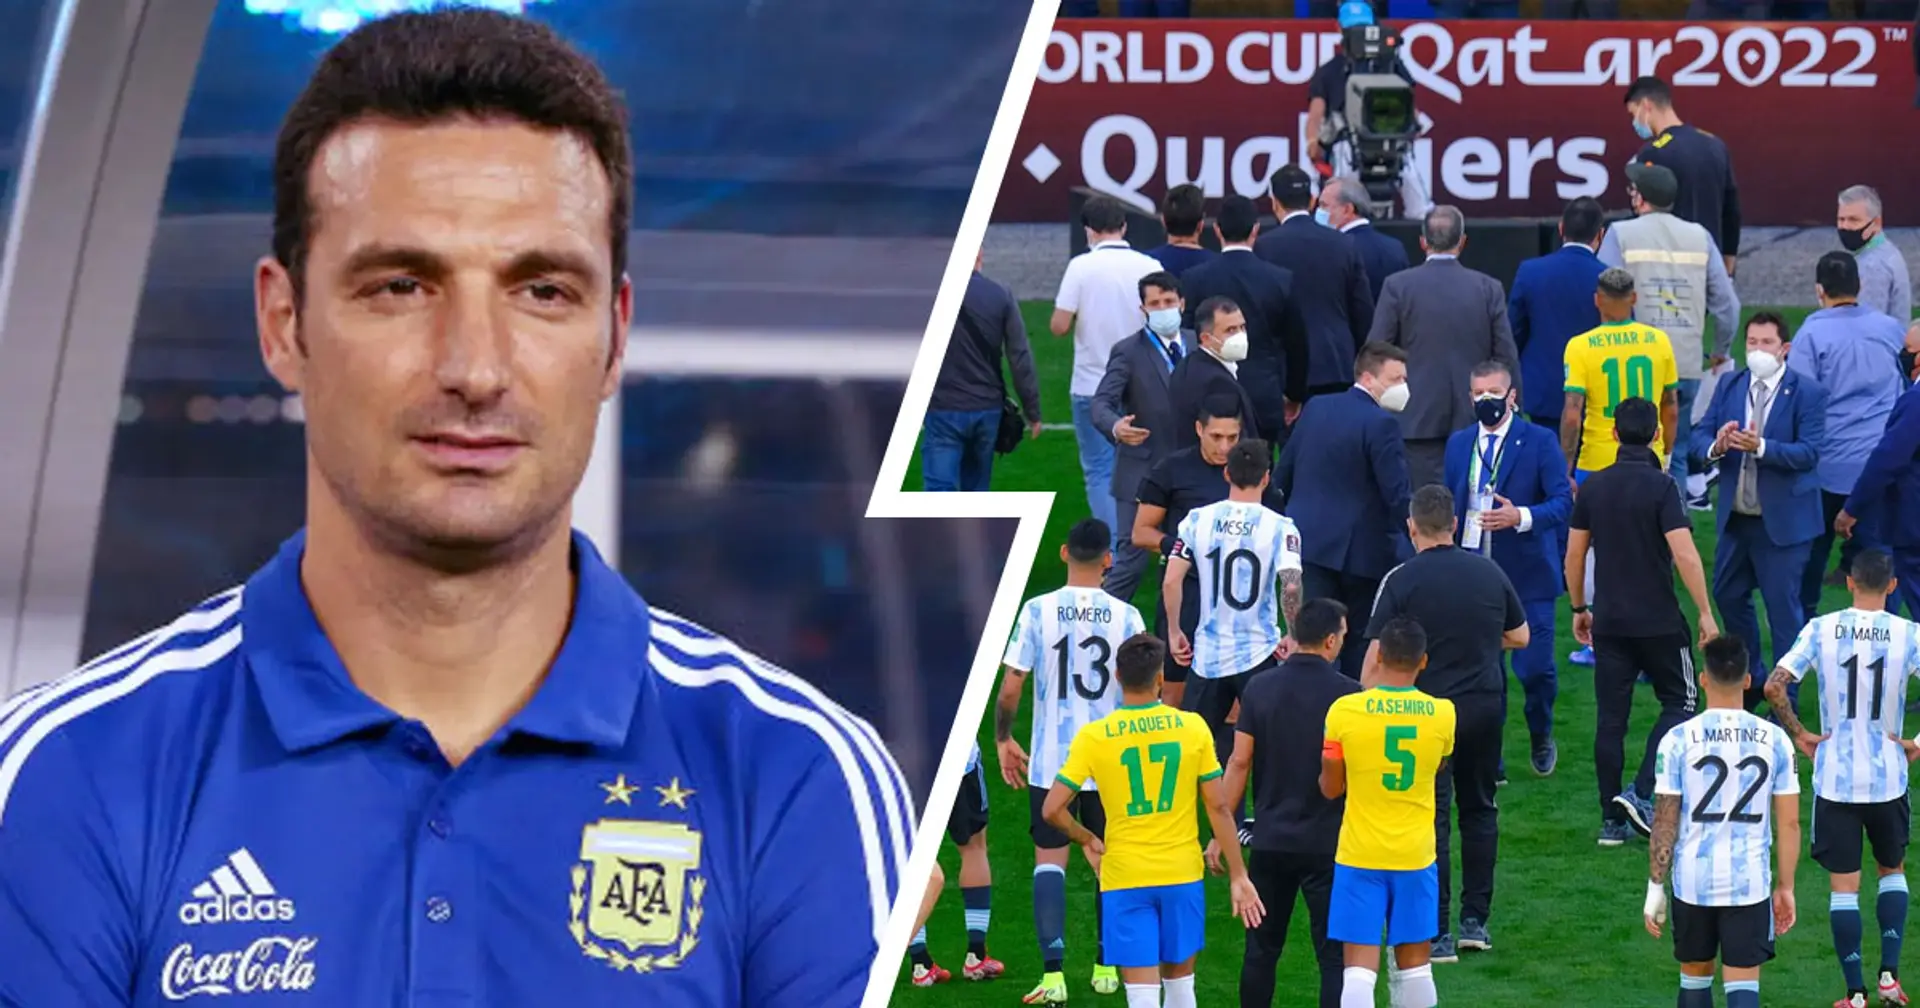 Argentina boss Scaloni: 'I'm very upset. I'm not letting my players get deported’